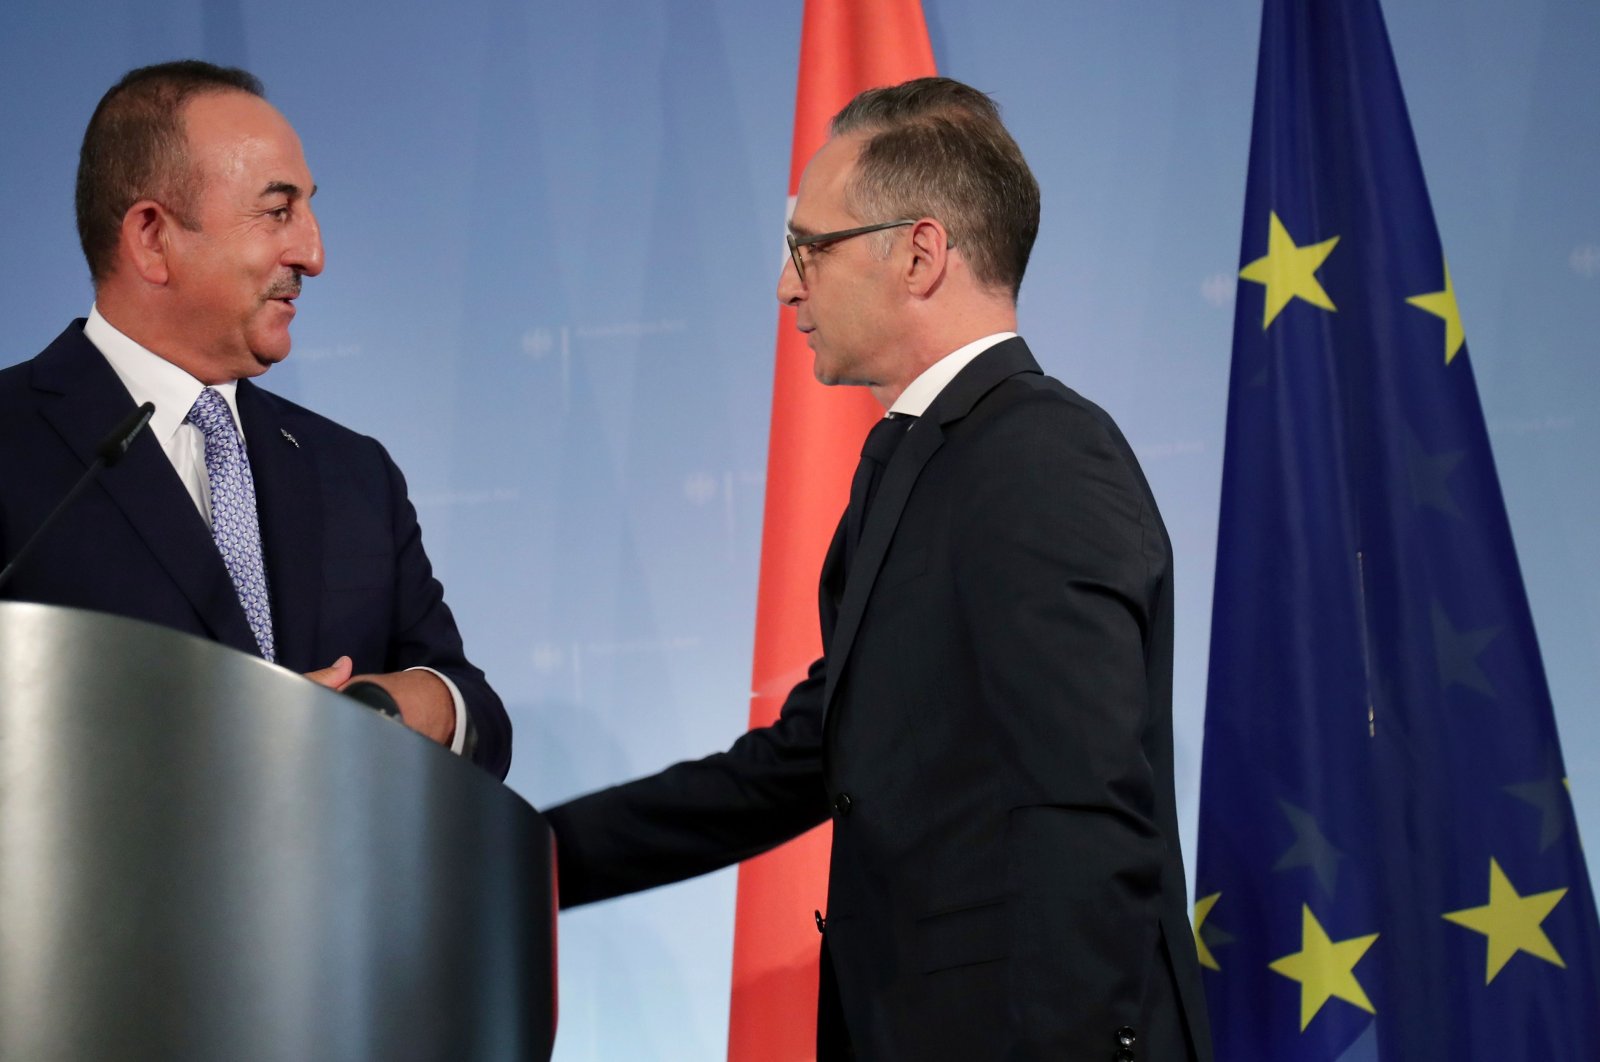 Foreign Minister Mevlüt Çavuşoğlu and his German counterpart Heiko Maas leave after a press conference in Berlin, July 2, 2020. (AFP Photo)